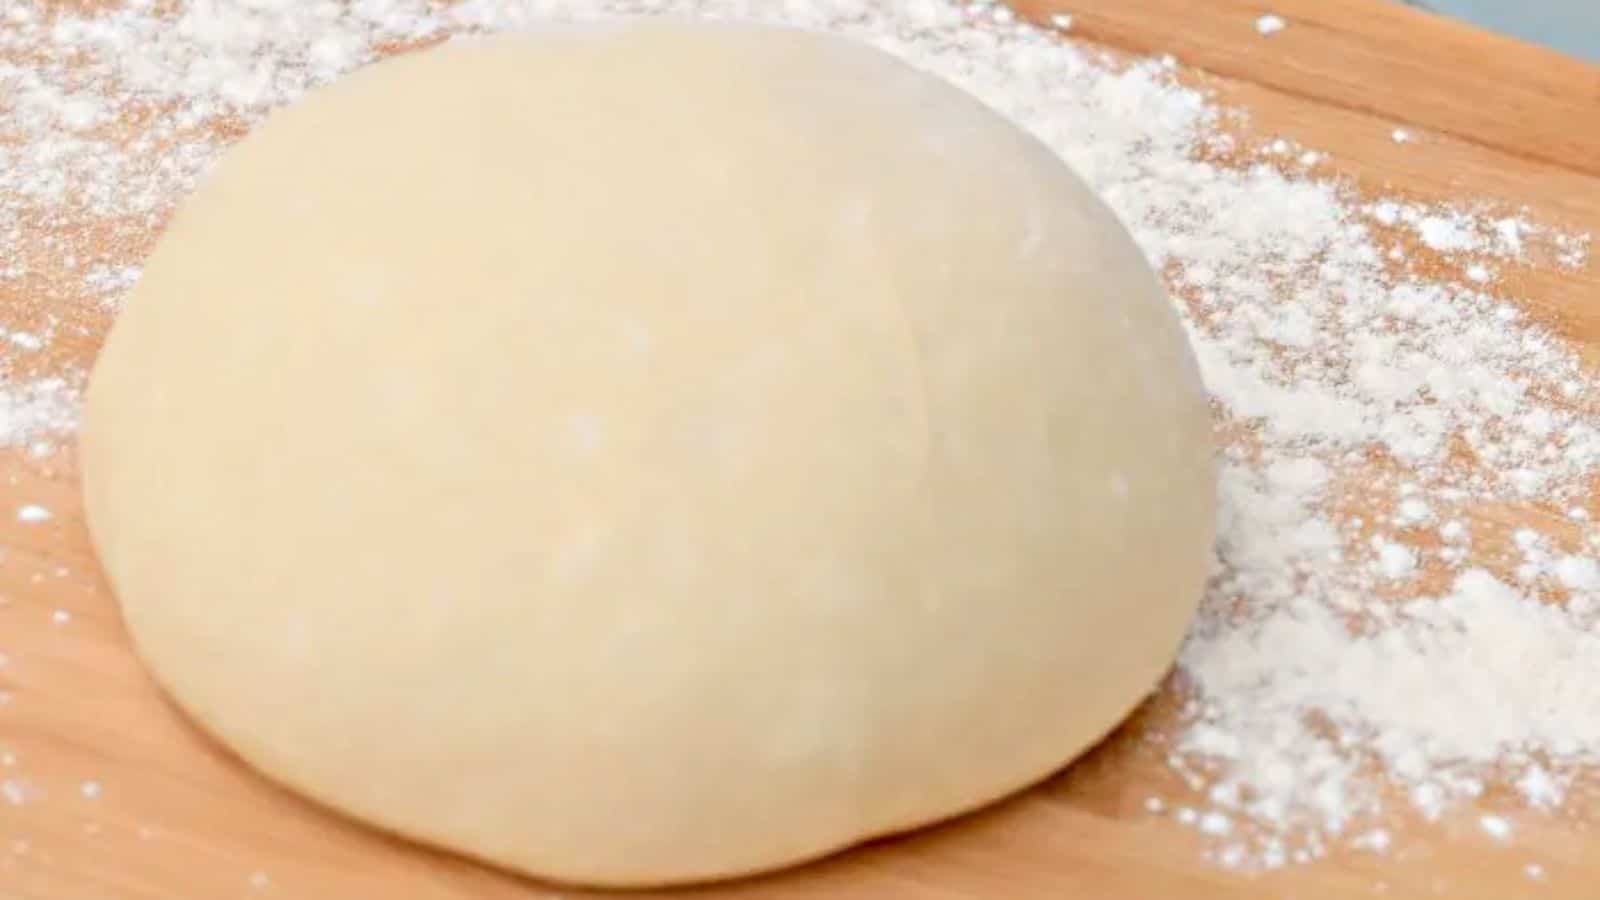 Image shows a round of Pizza Dough on a wooden board coated with flour.